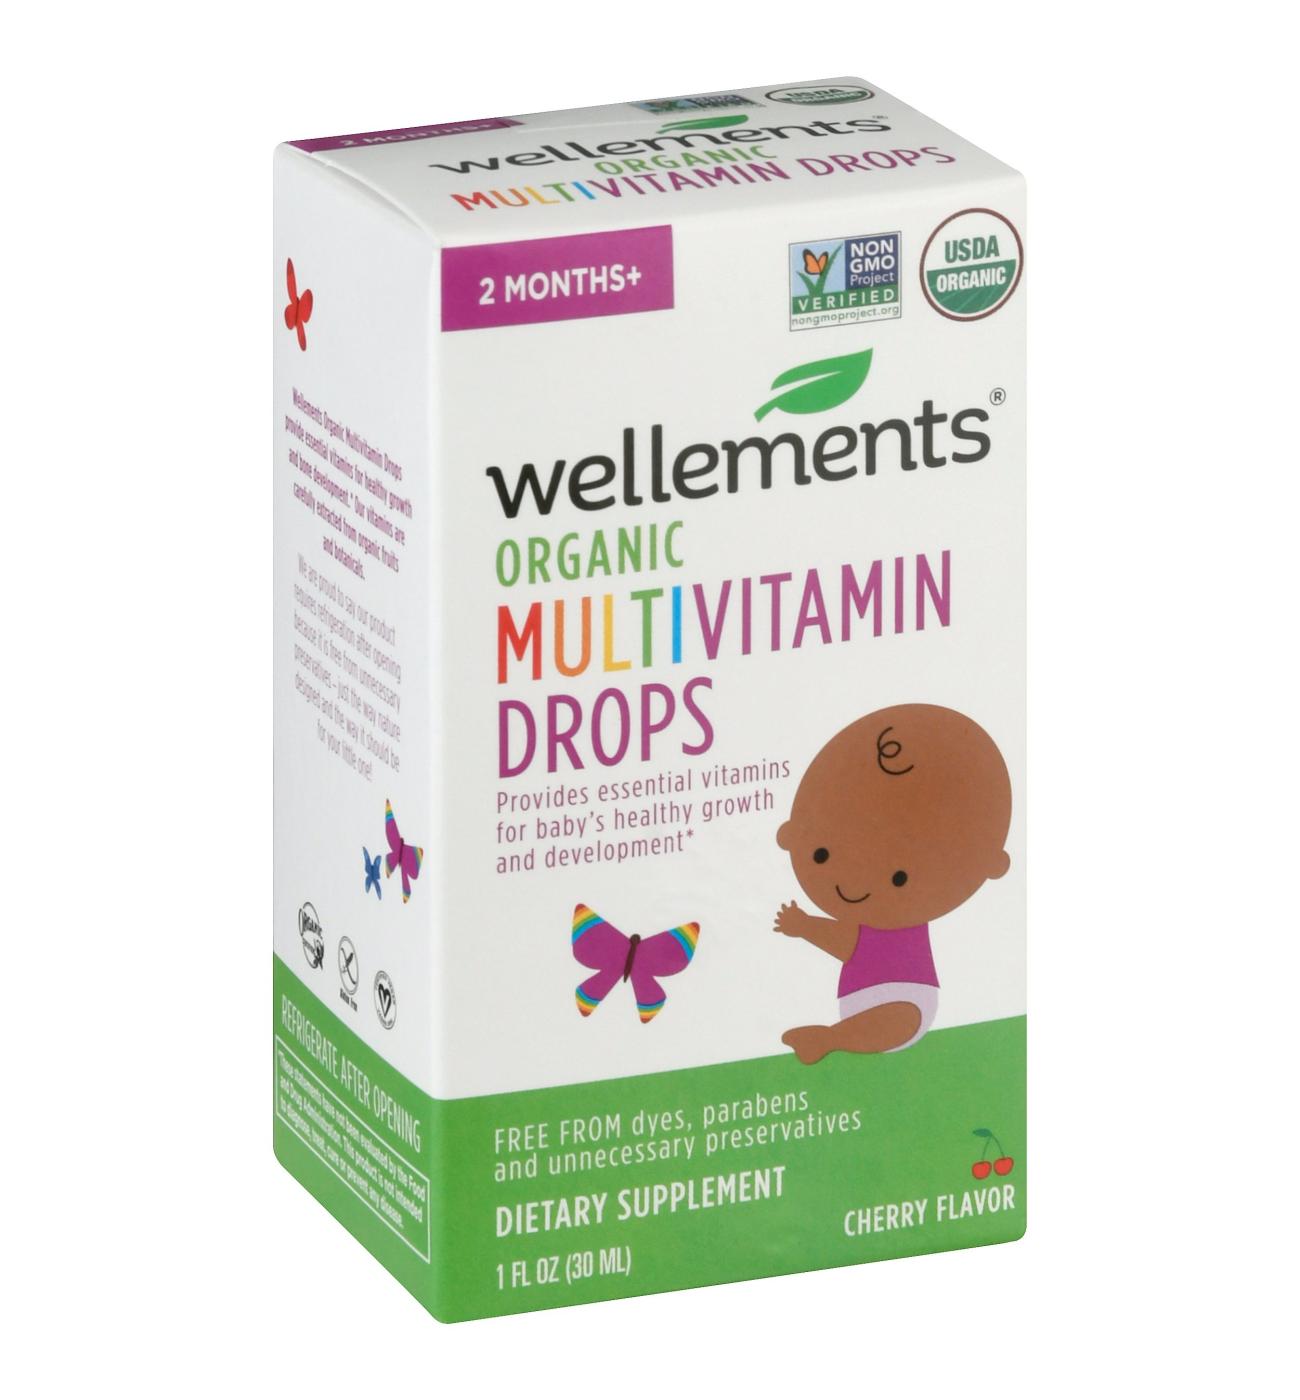 Wellements Organic Multivitamin Drops; image 1 of 2